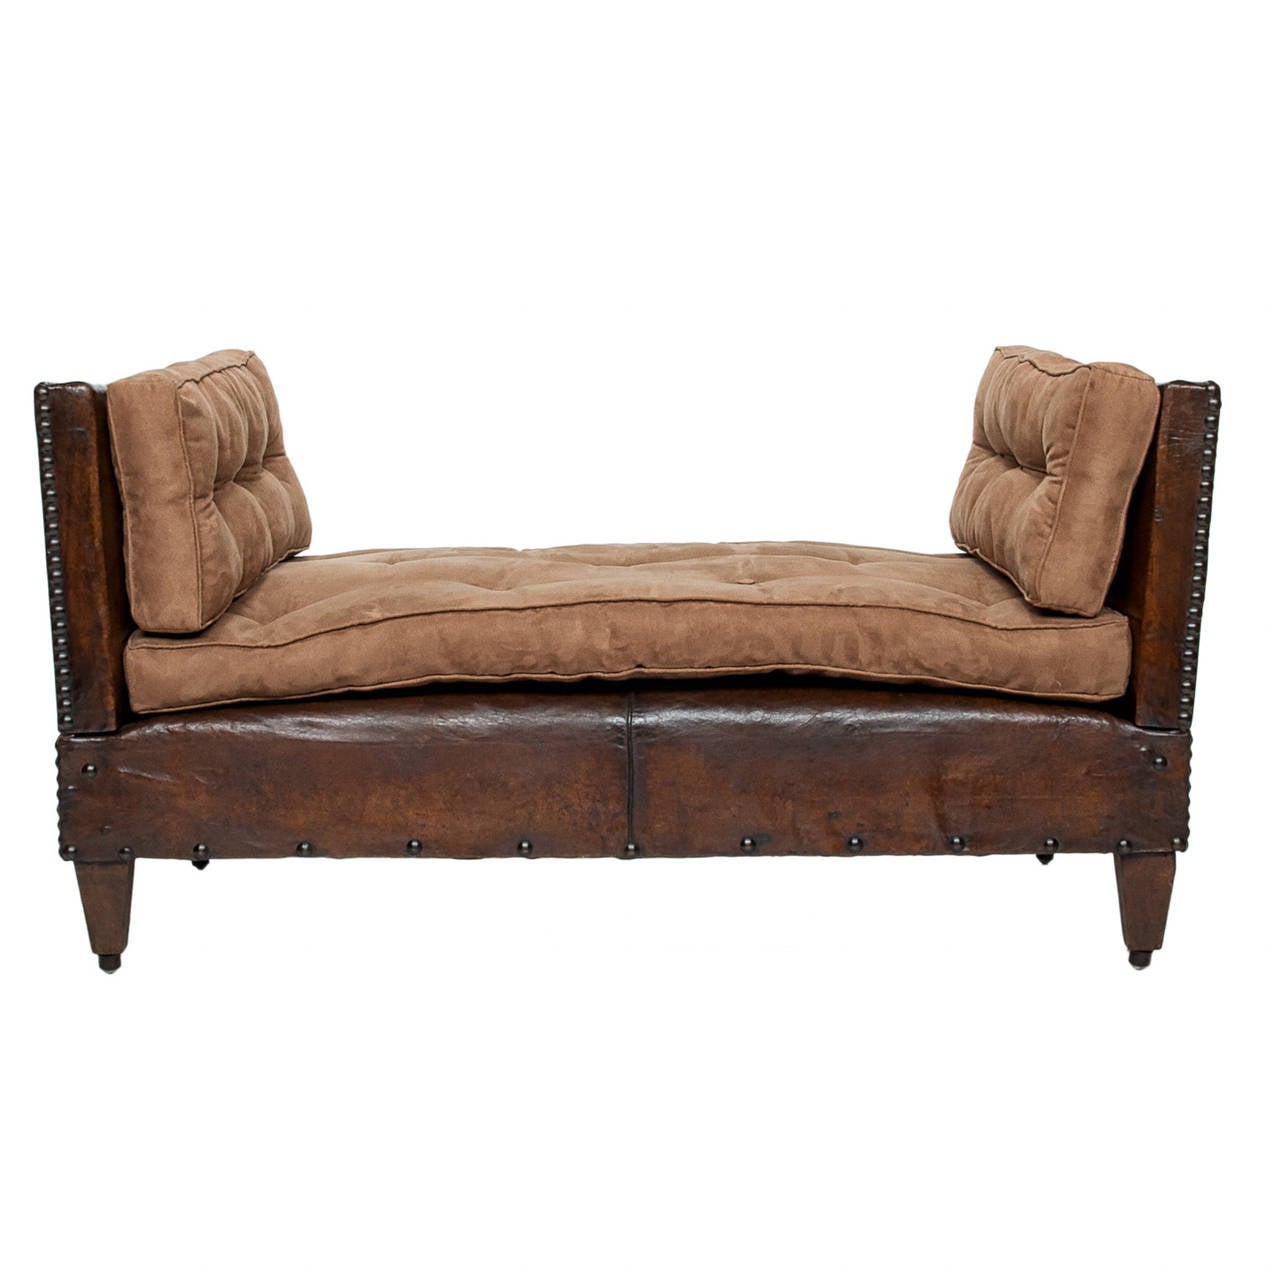 20th Century French Adjustable Daybed